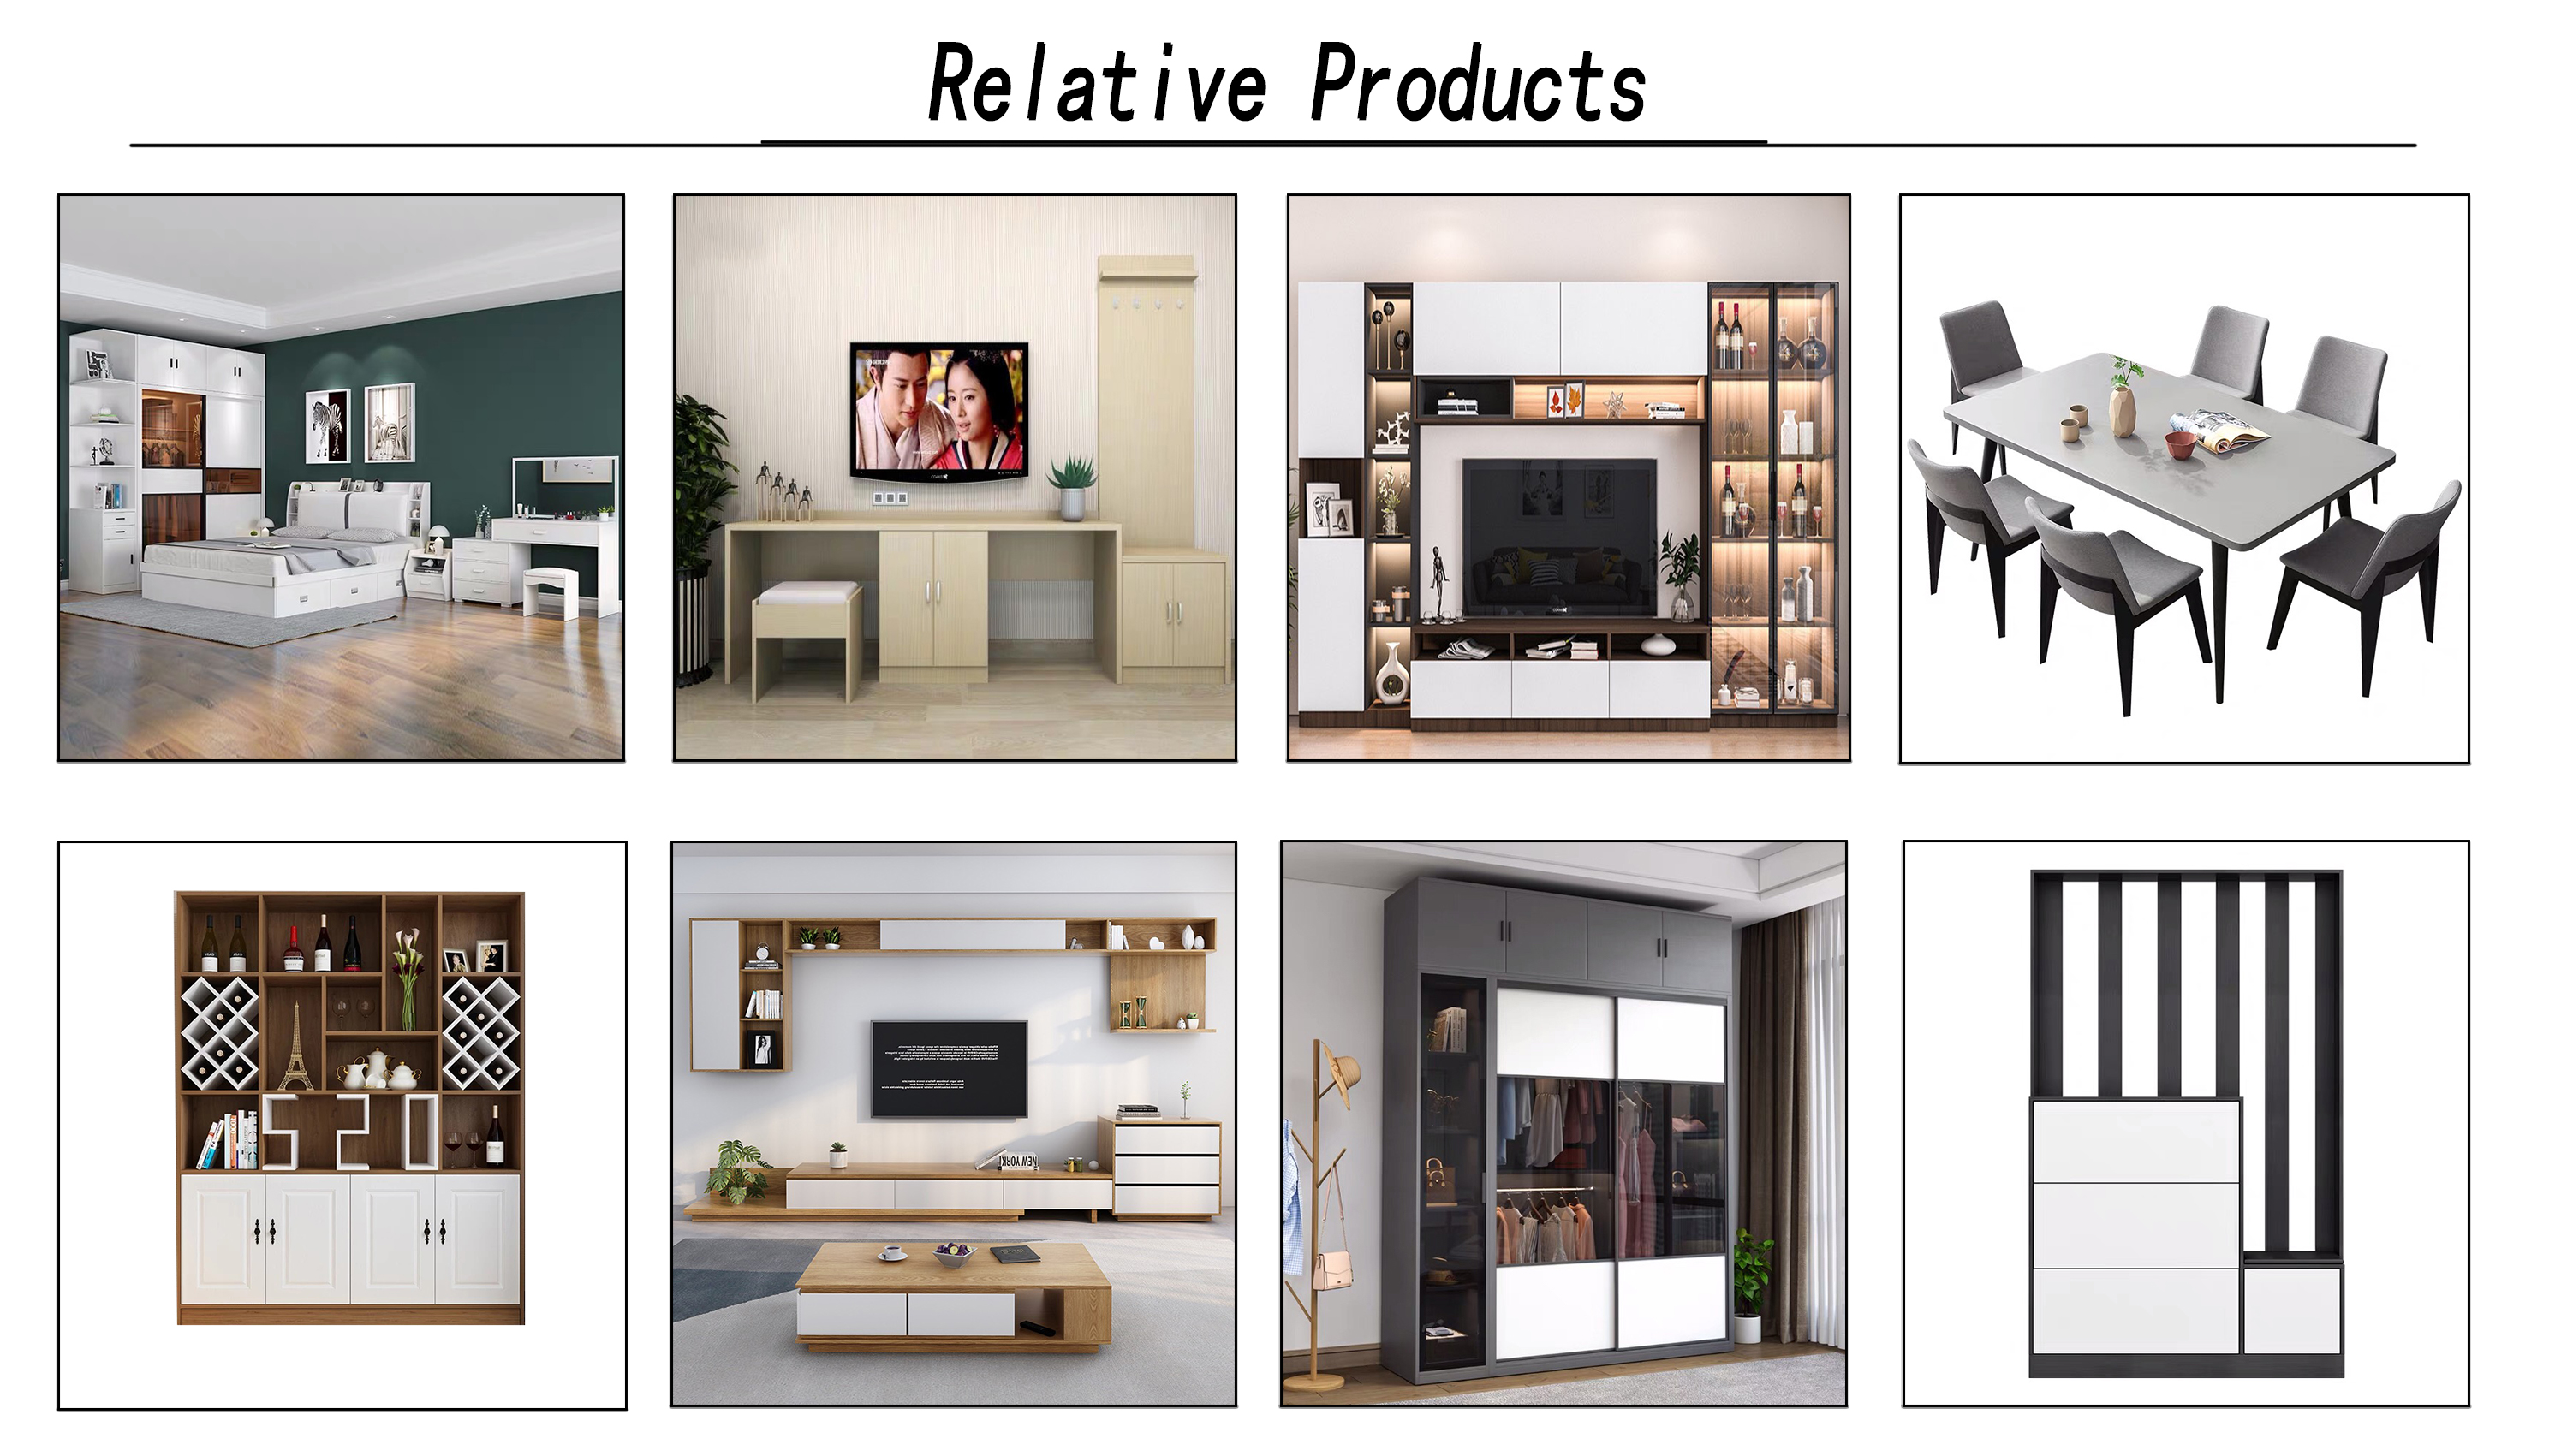 Relative Products(1)